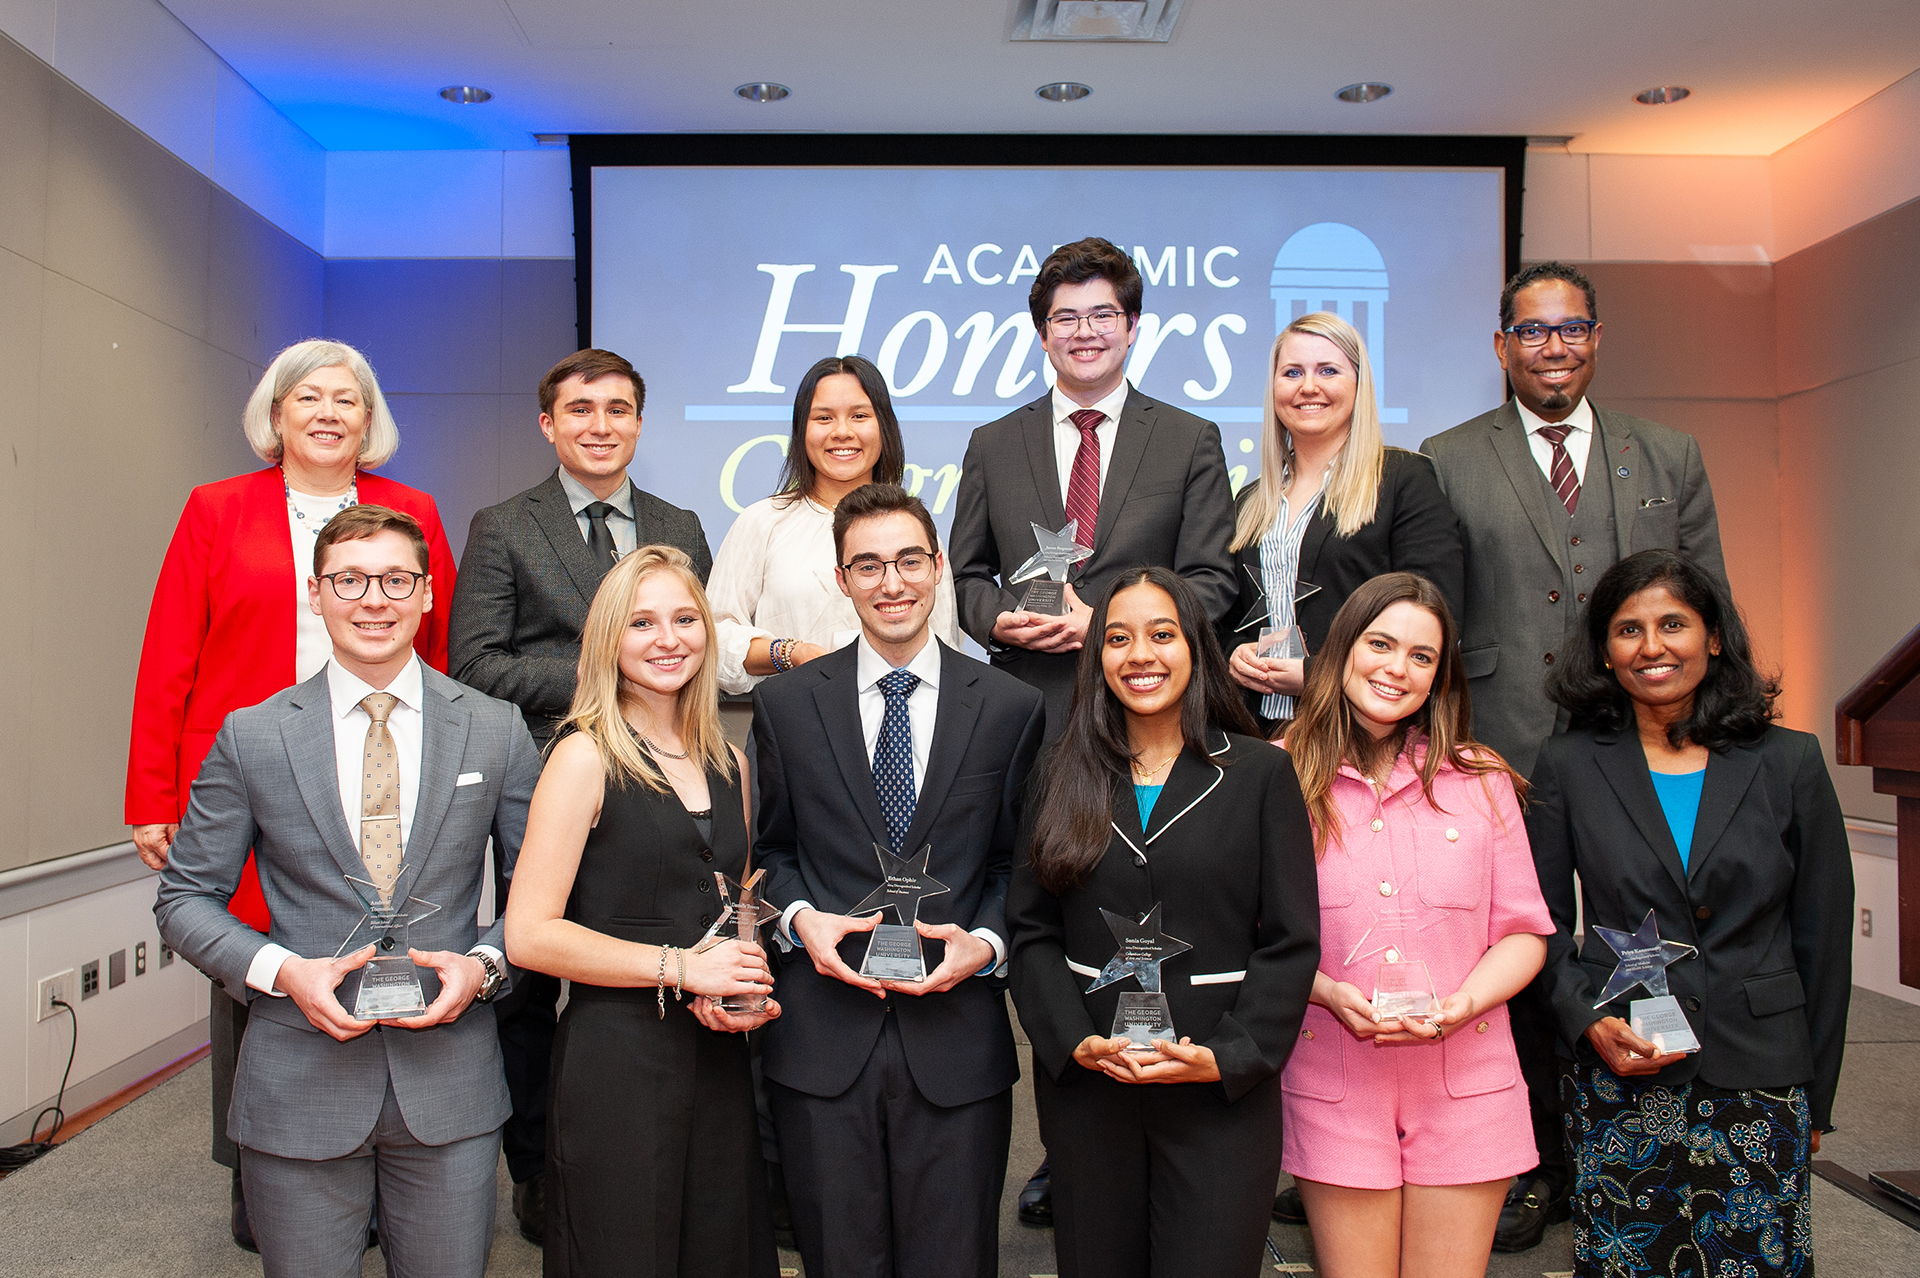 President Ellen M. Granberg and Provost Christopher Alan Bracey recognized the 10 Distinguished Scholars in a ceremony at the University Student Center.